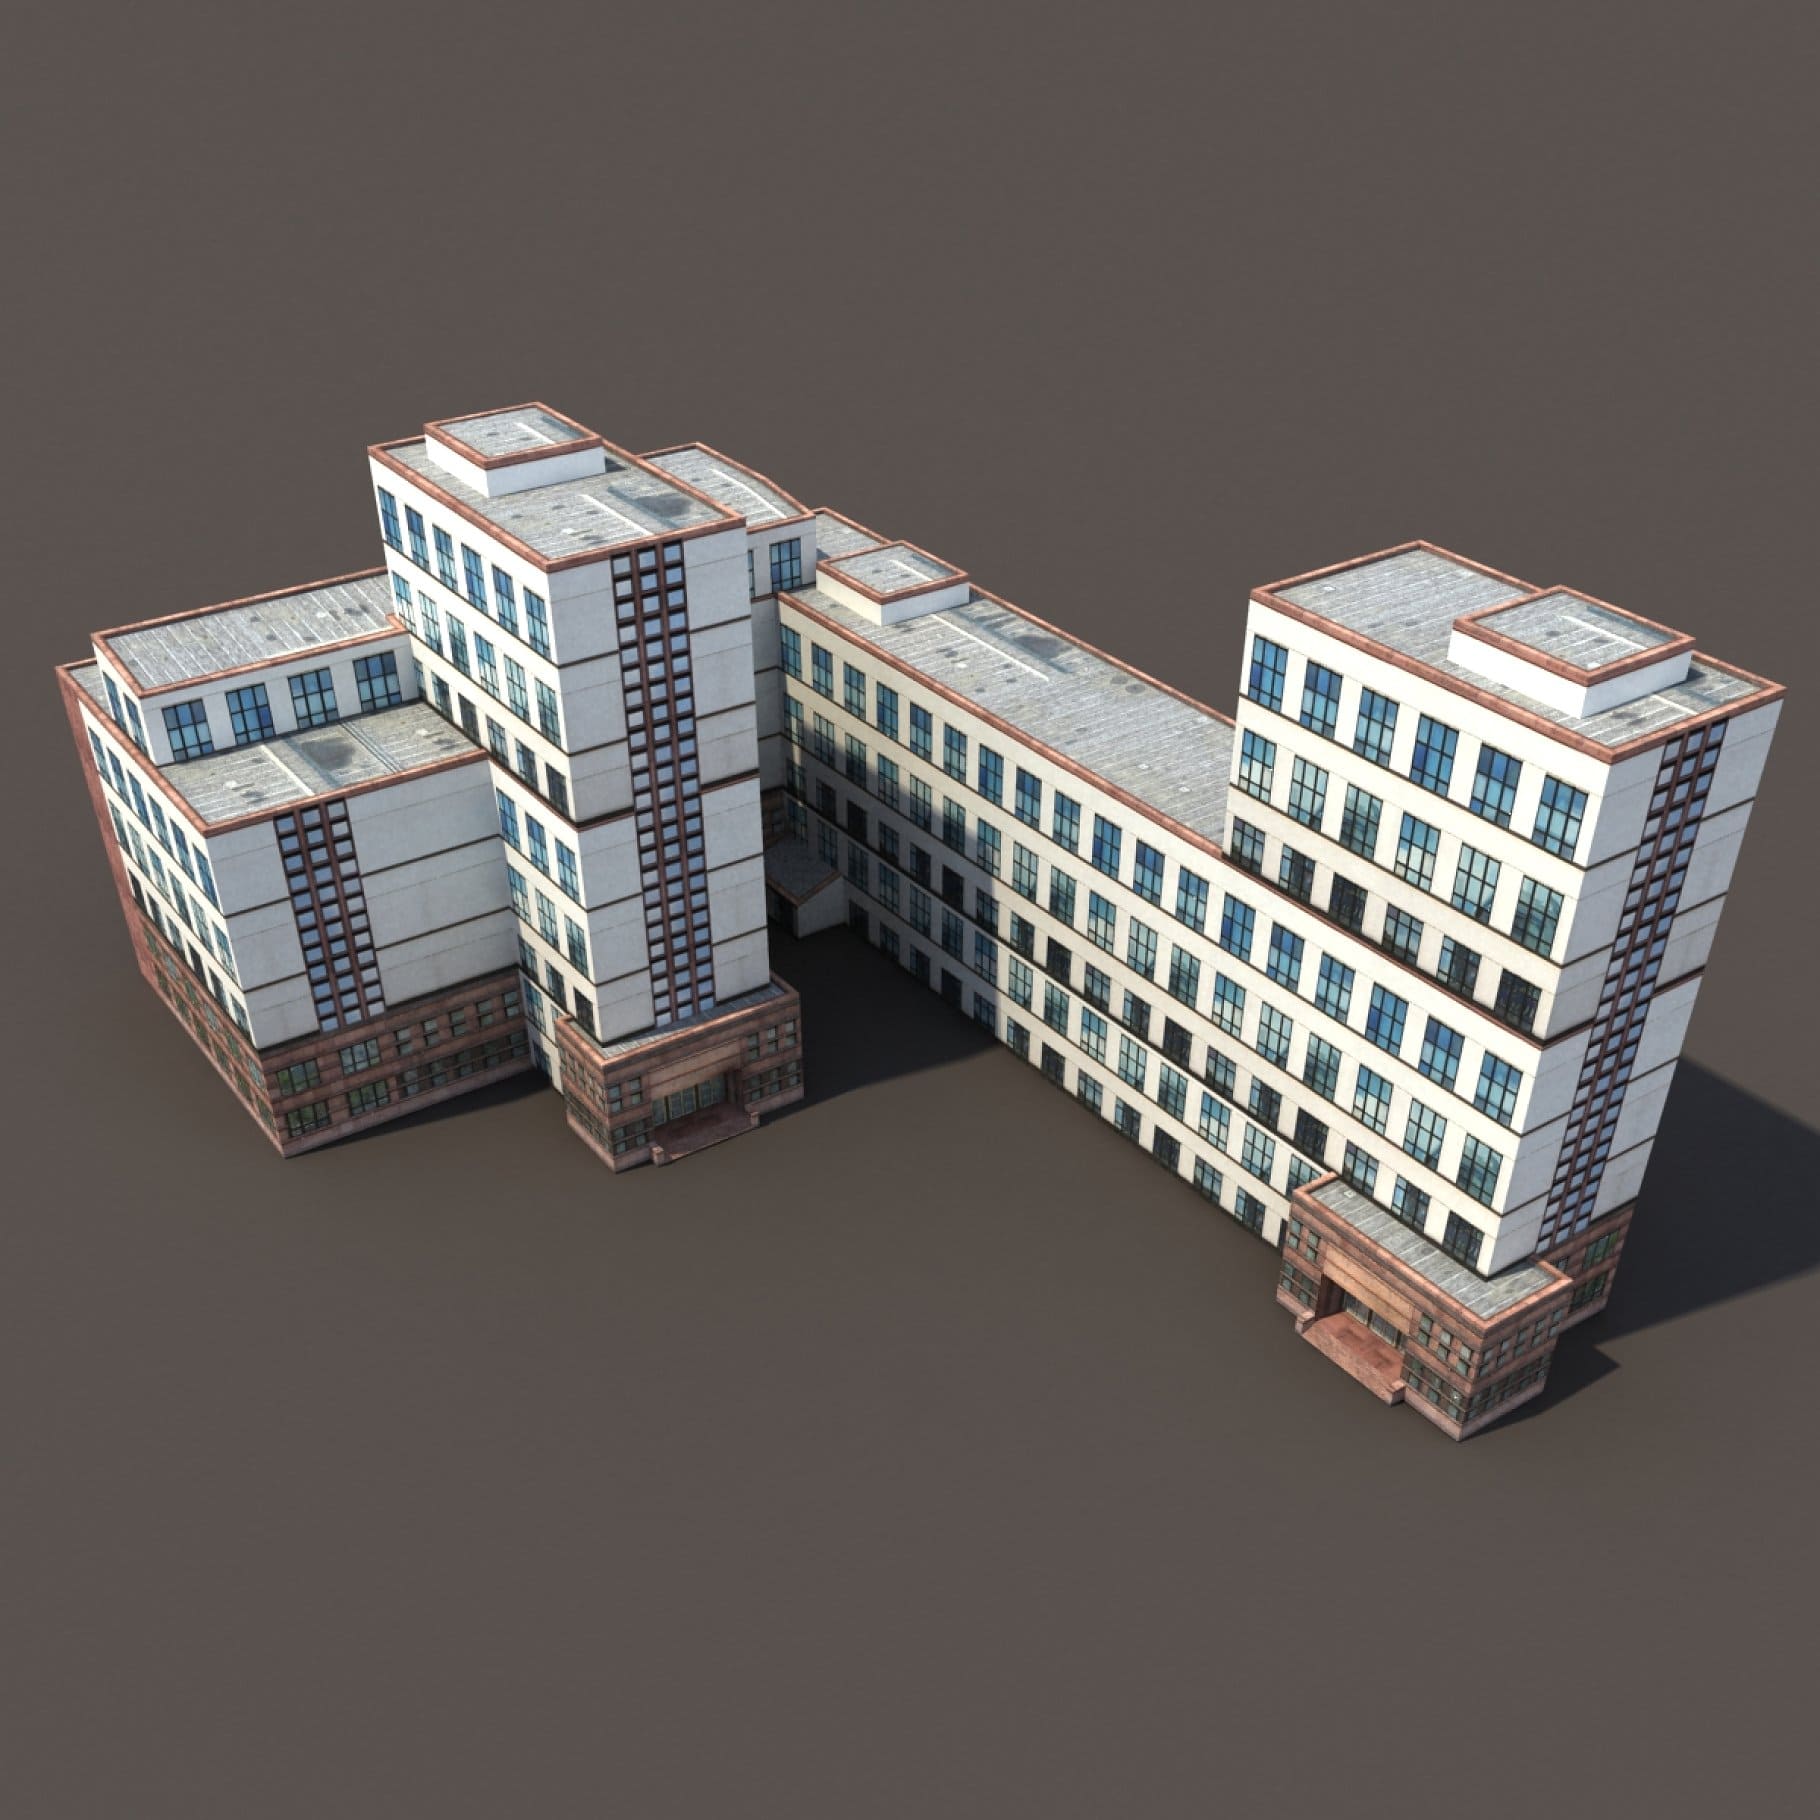 Top view of a 3D model of an office building.